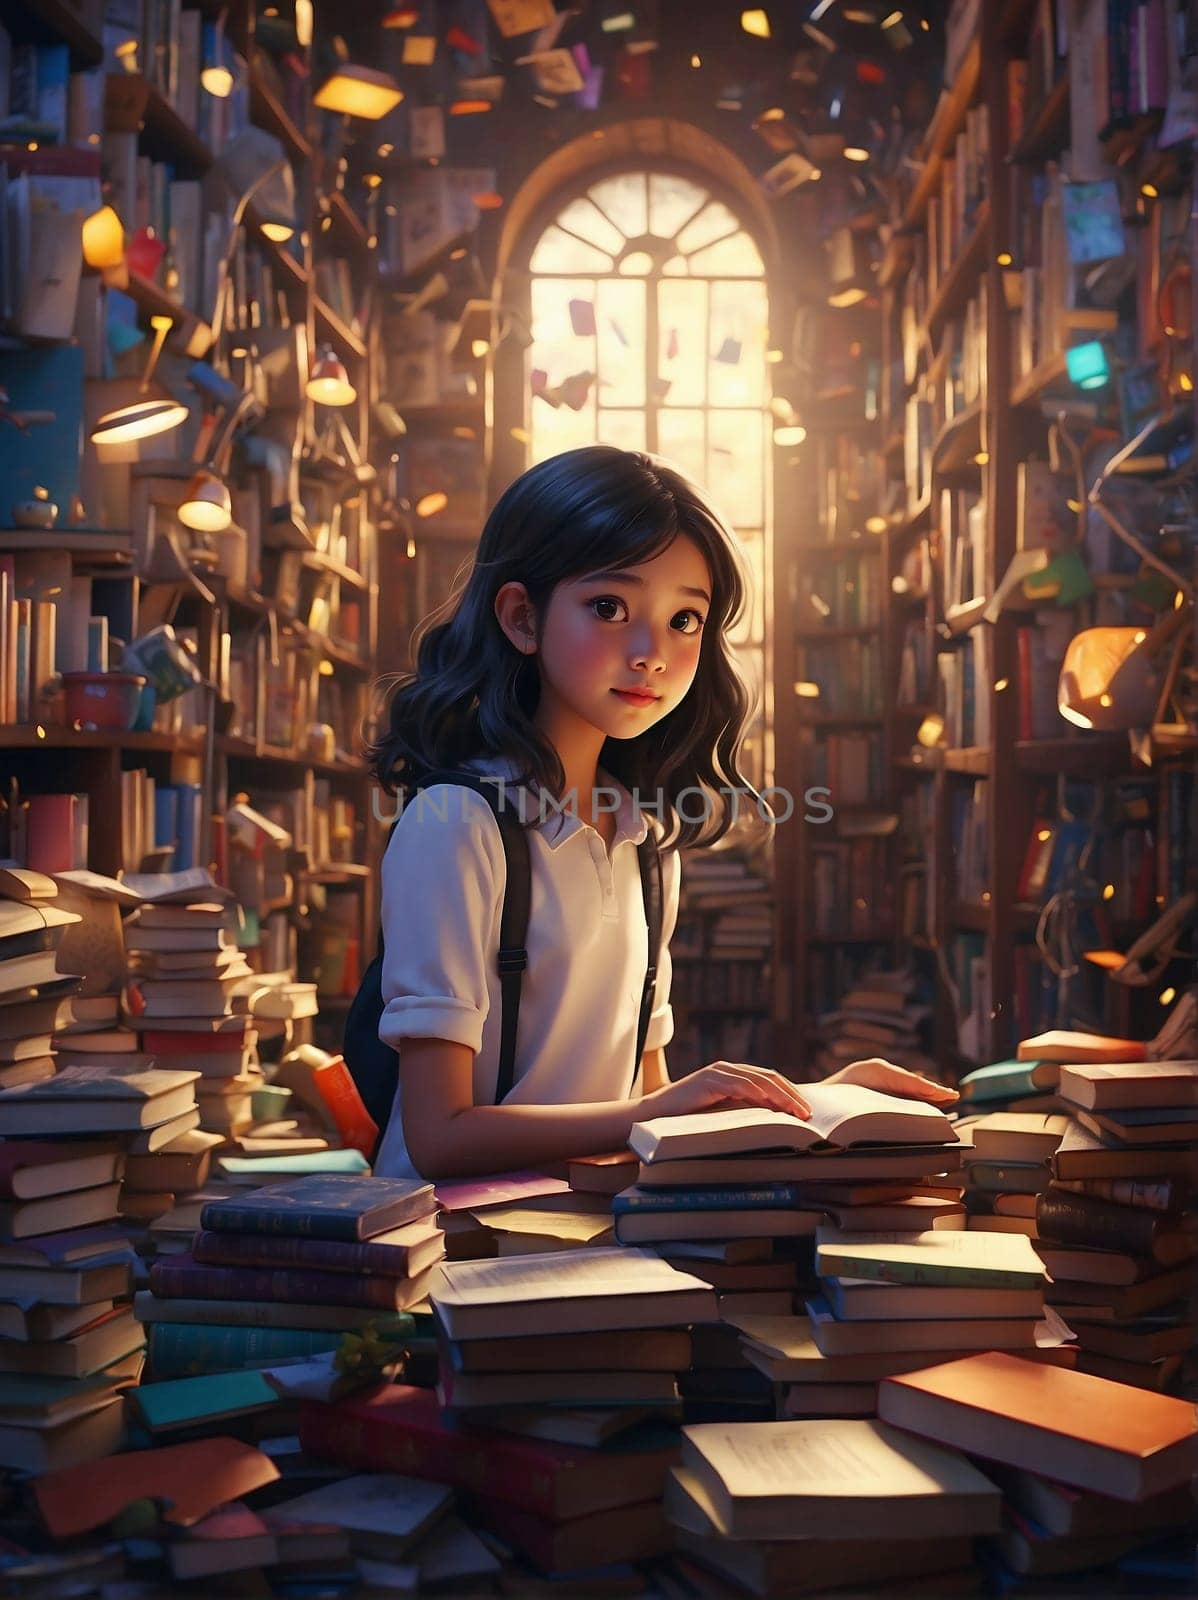 A young girl engrossed in her studies, sitting at a table filled with numerous books.